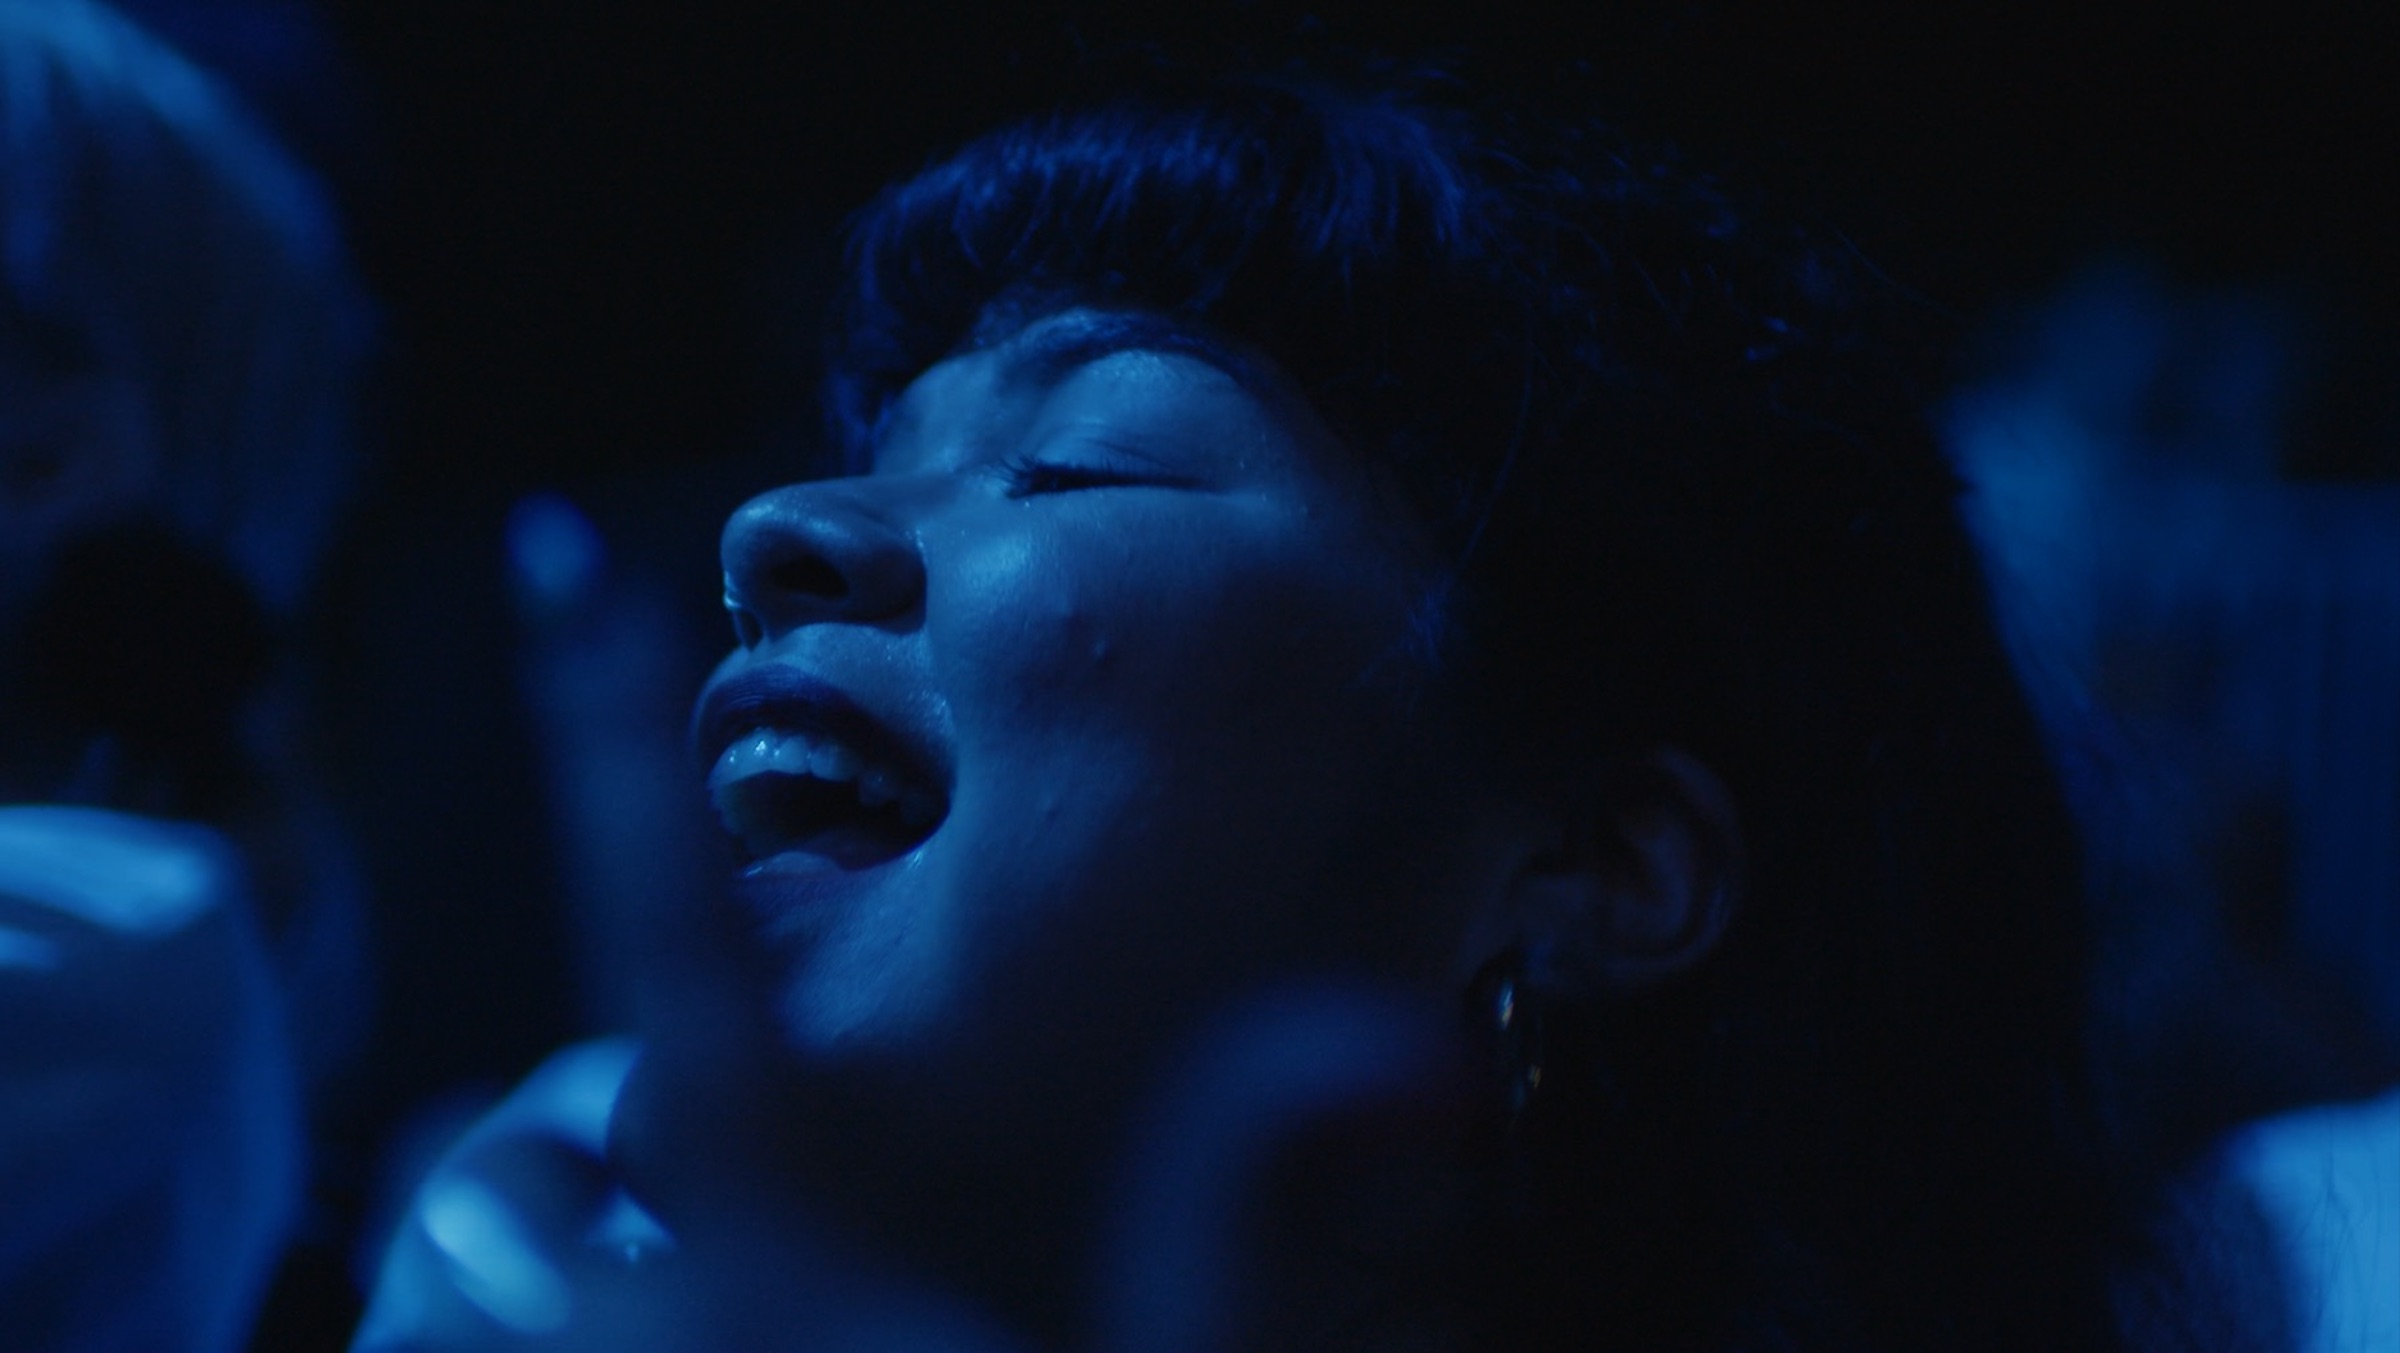 Doris Muñoz dances in a blue-lit crowd at a concert in New York City. This is a close-up of her face grinning, open mouthed.